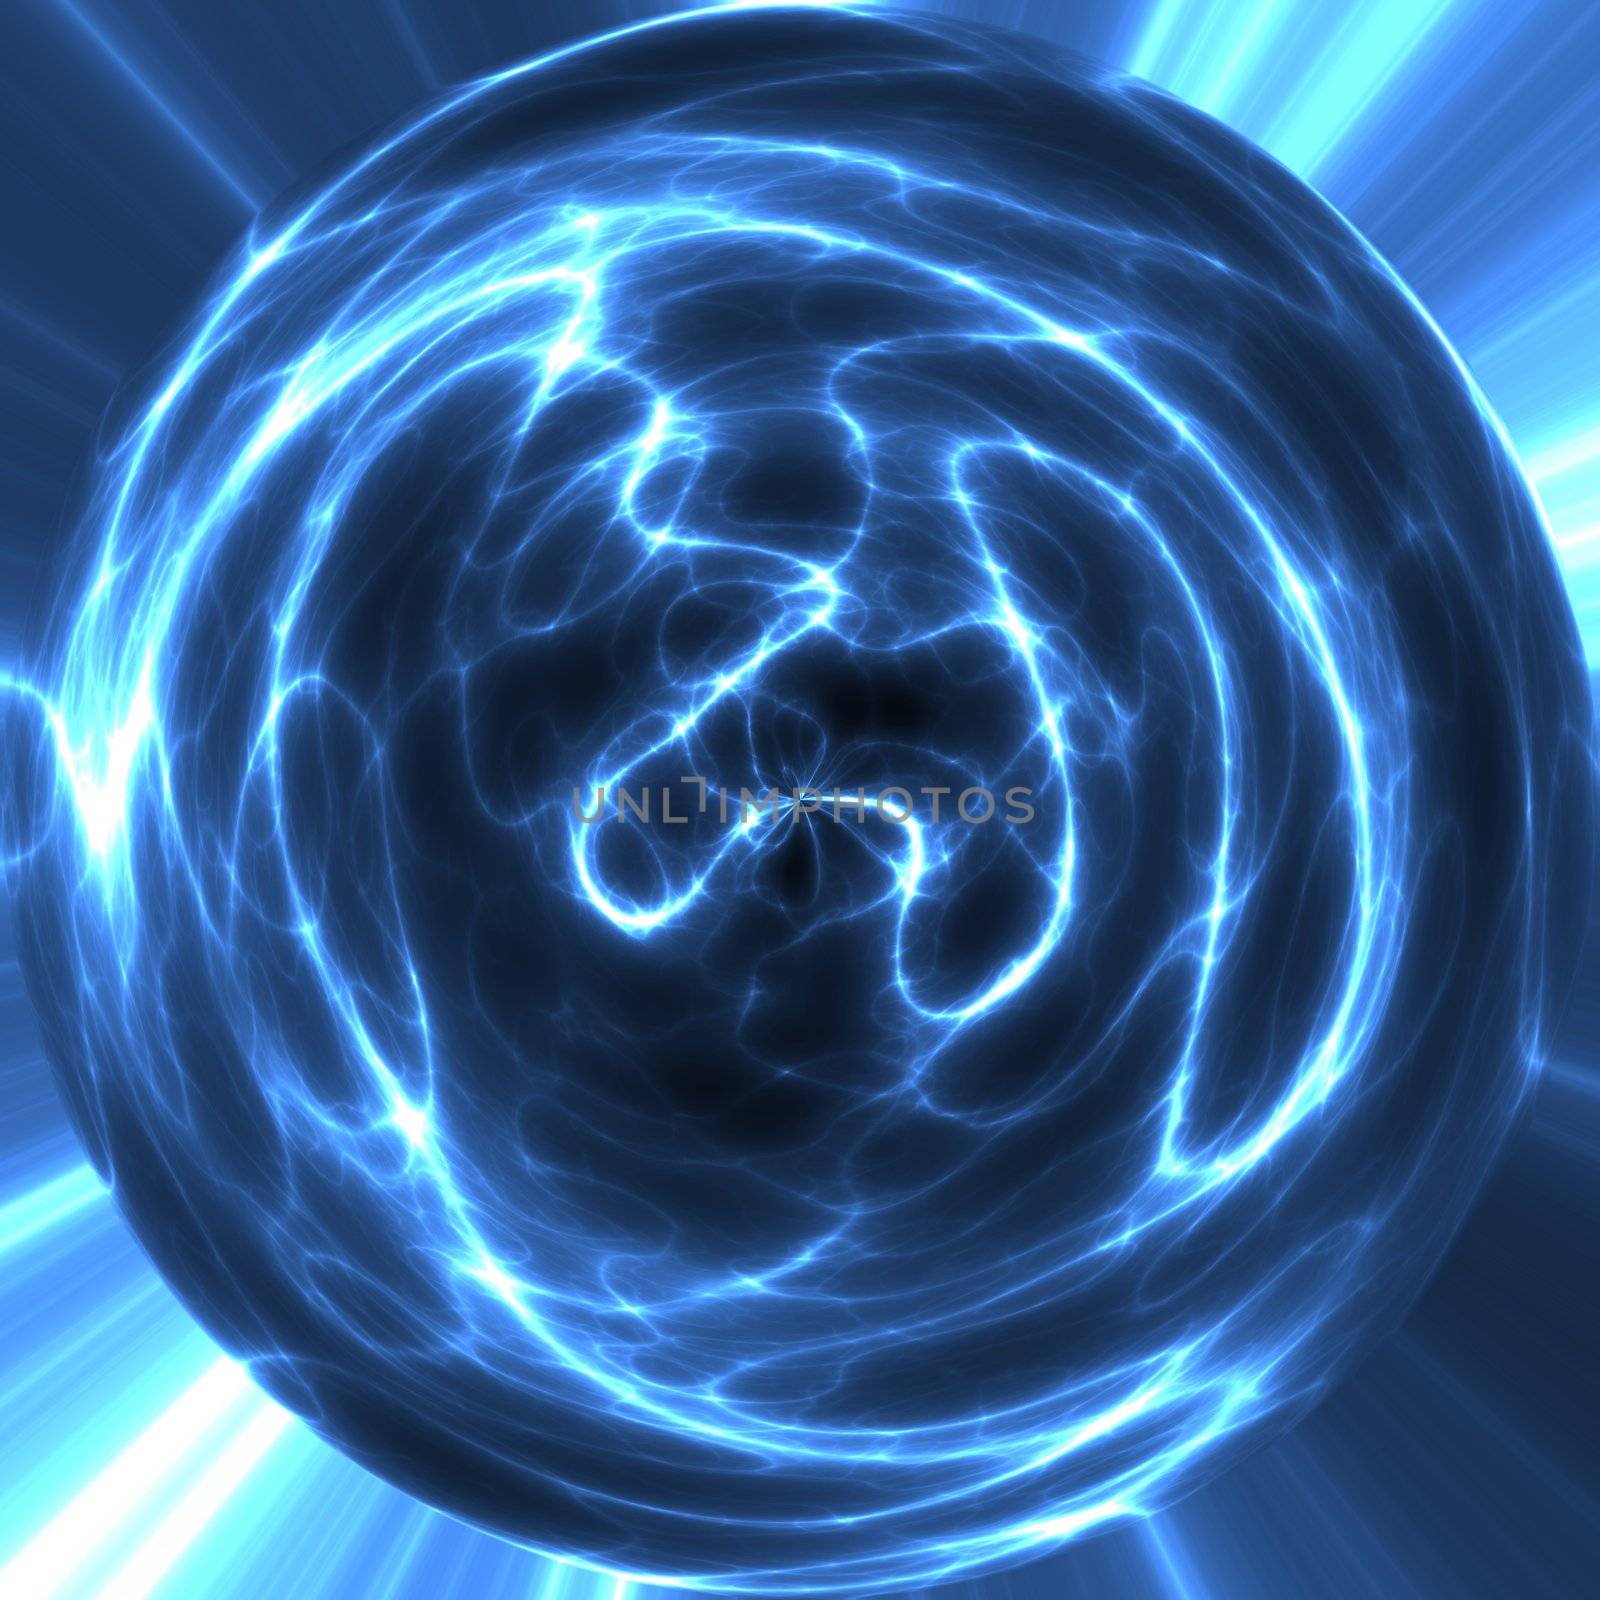 large abstract image of electricity or lightning ball or orb